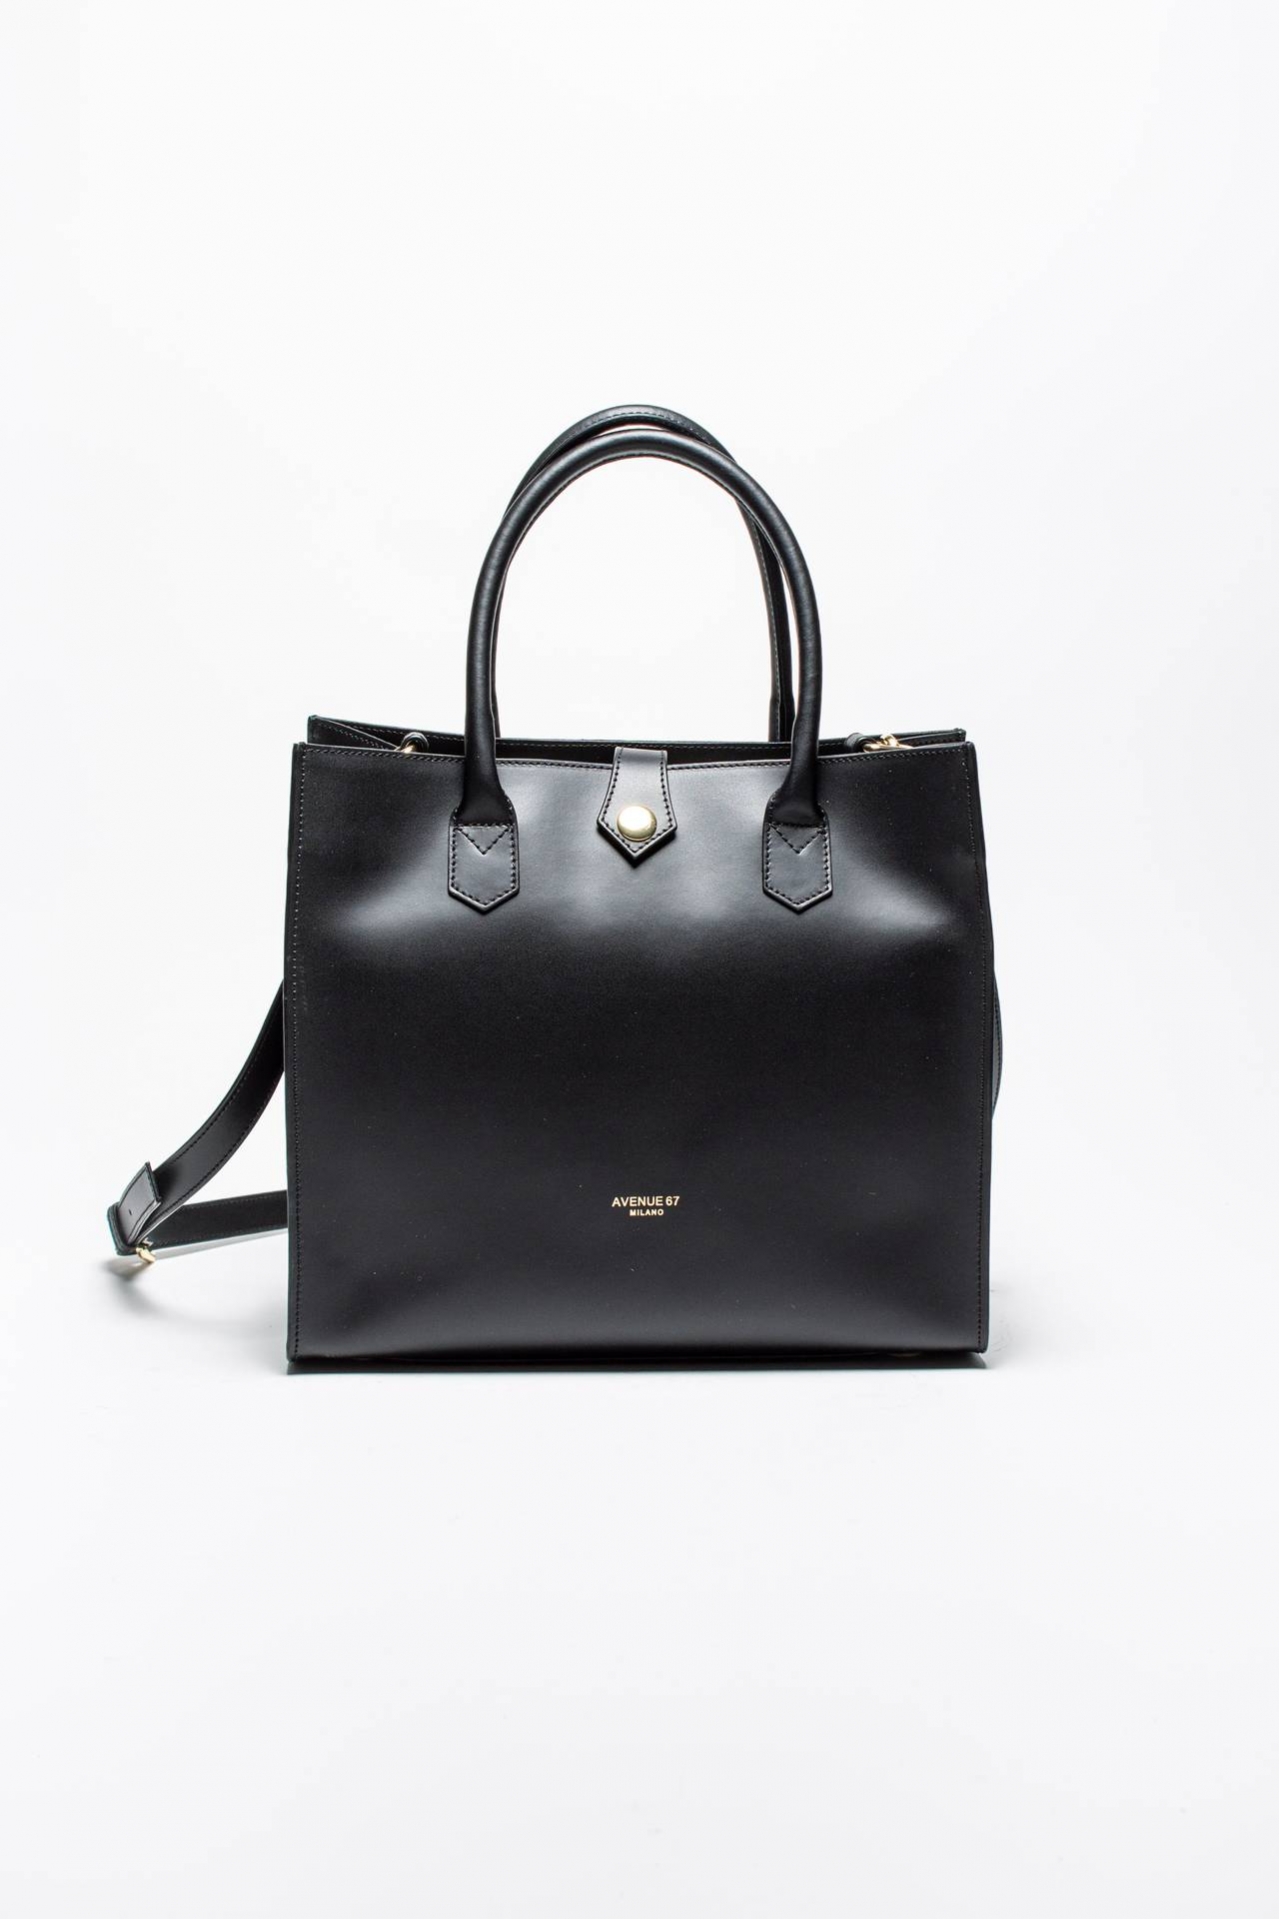 SIENNA bag in leather